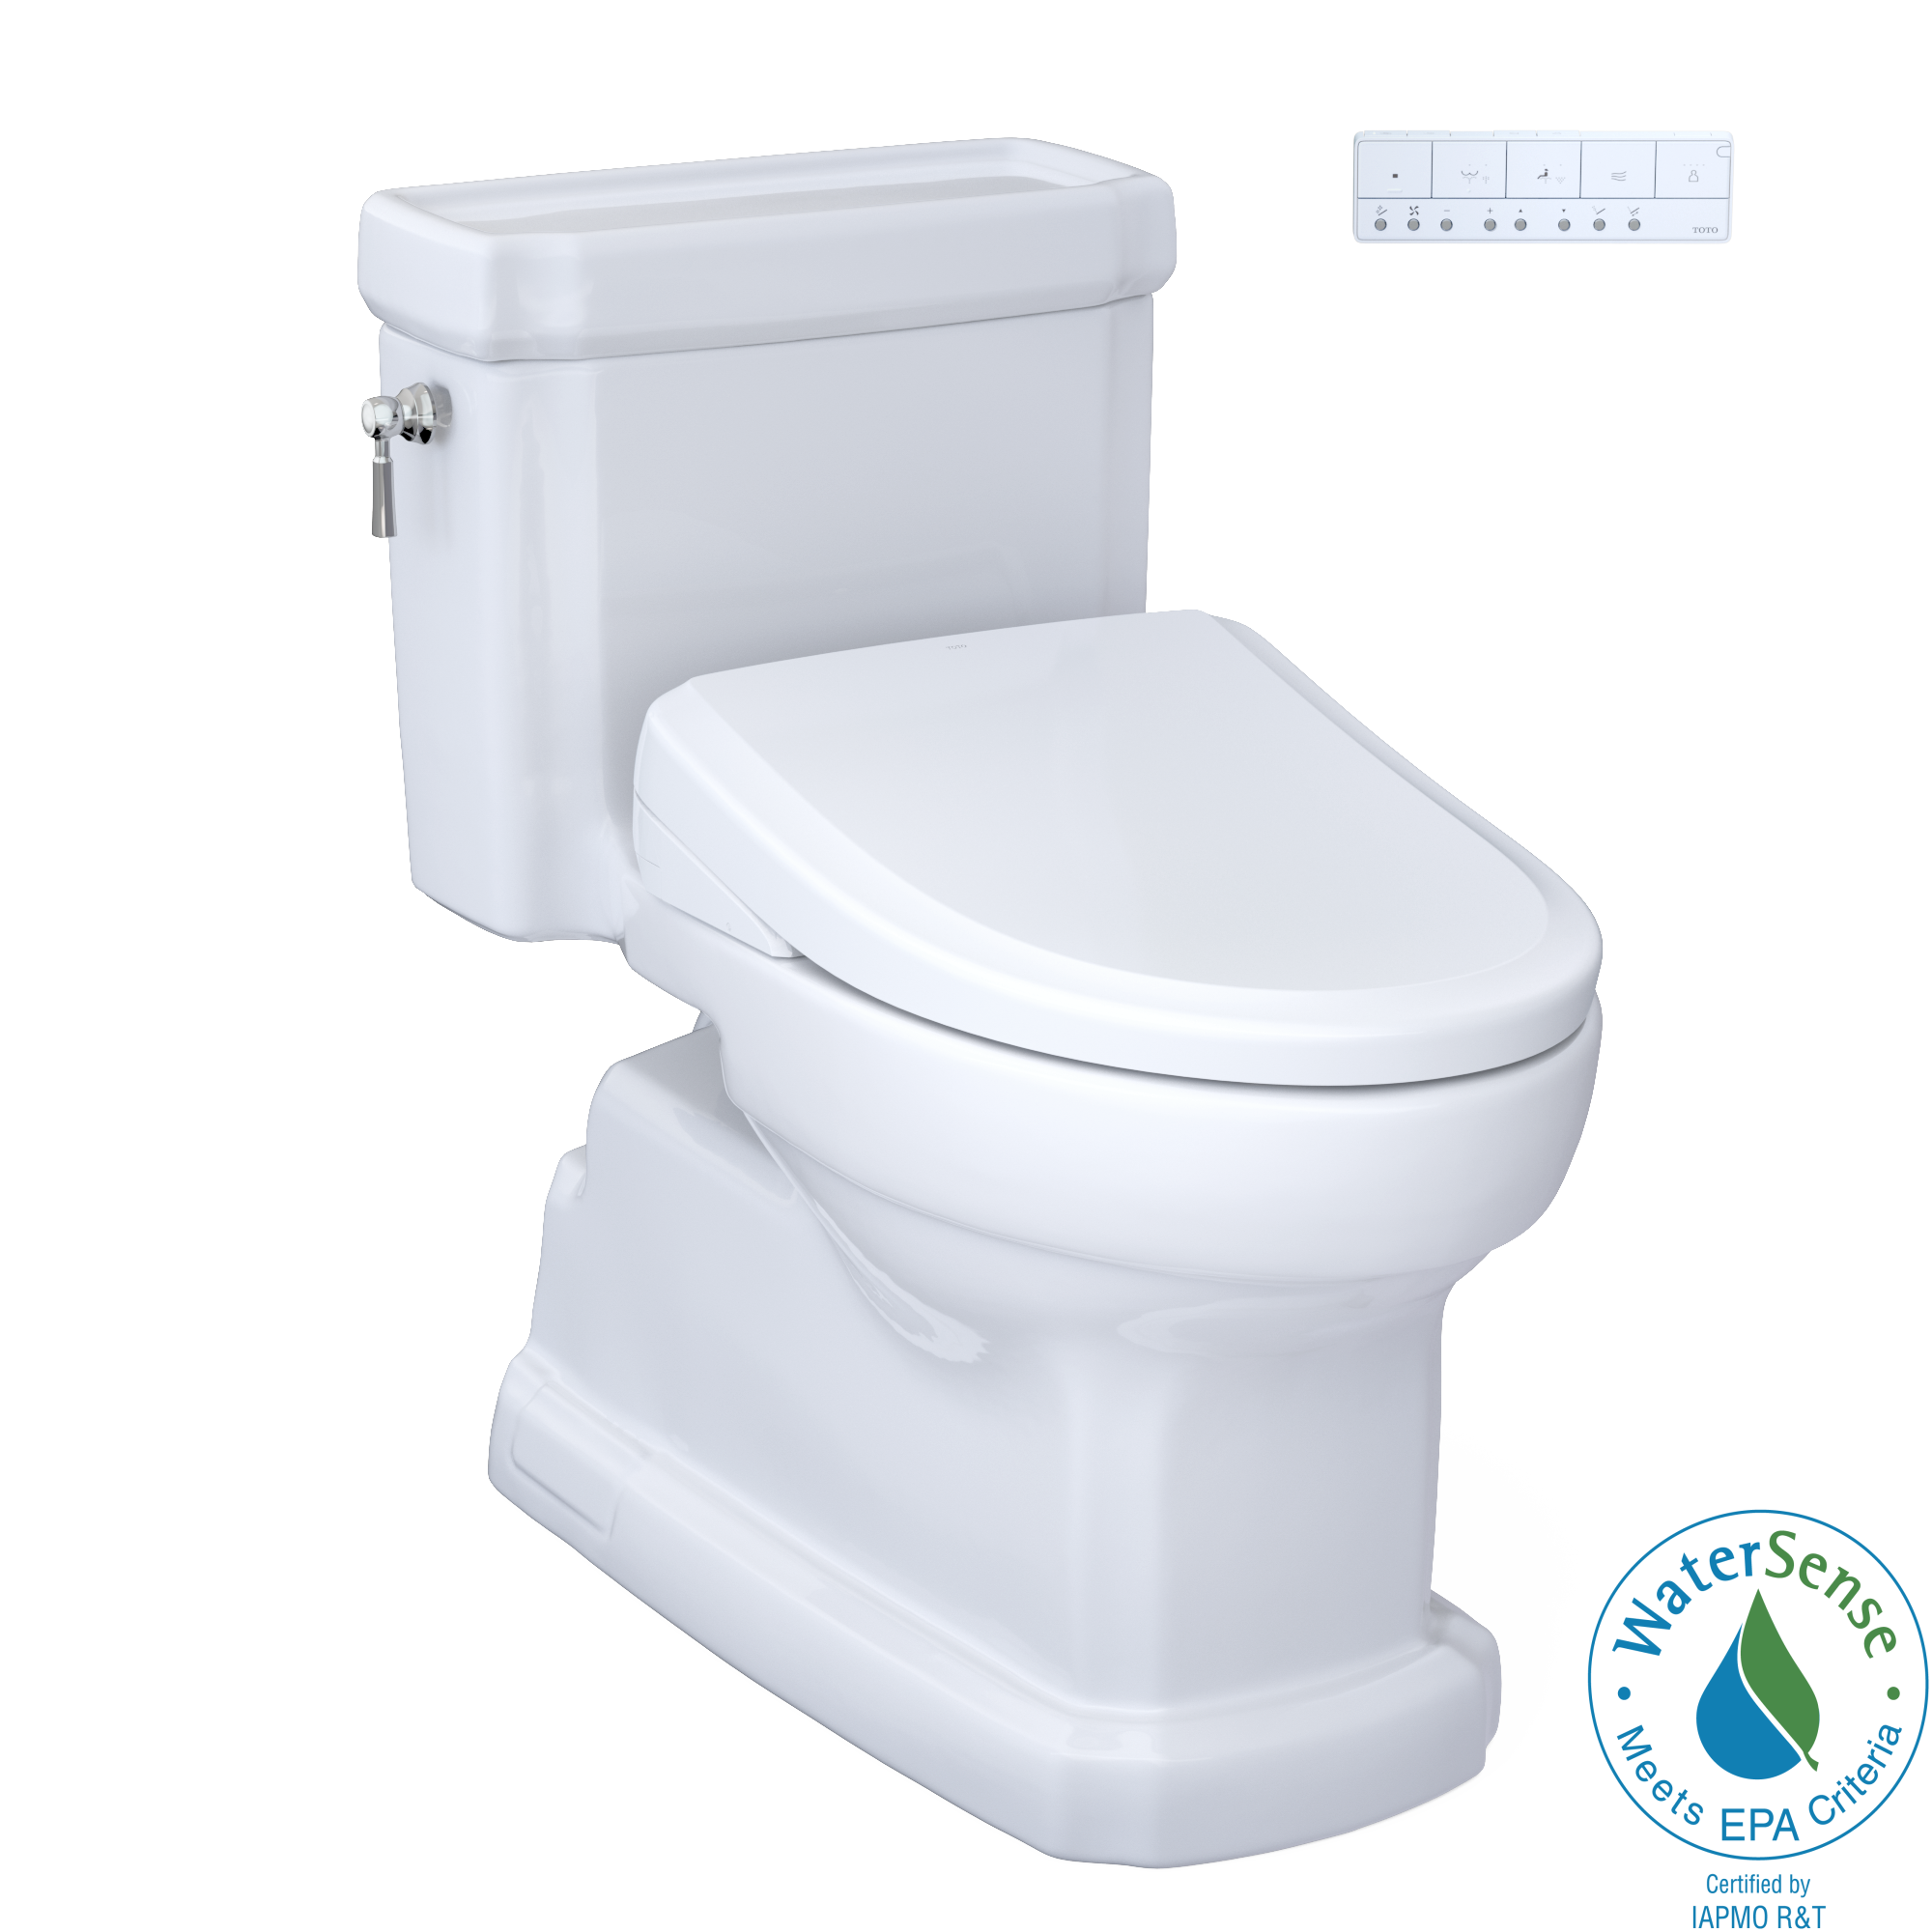 TOTO WASHLET+ Eco Guinevere Elongated 1.28 GPF Universal Height Toilet with S7 Classic Bidet Seat, Cotton White - MW9744724CEFG#01, MW9744724CEFGA#01